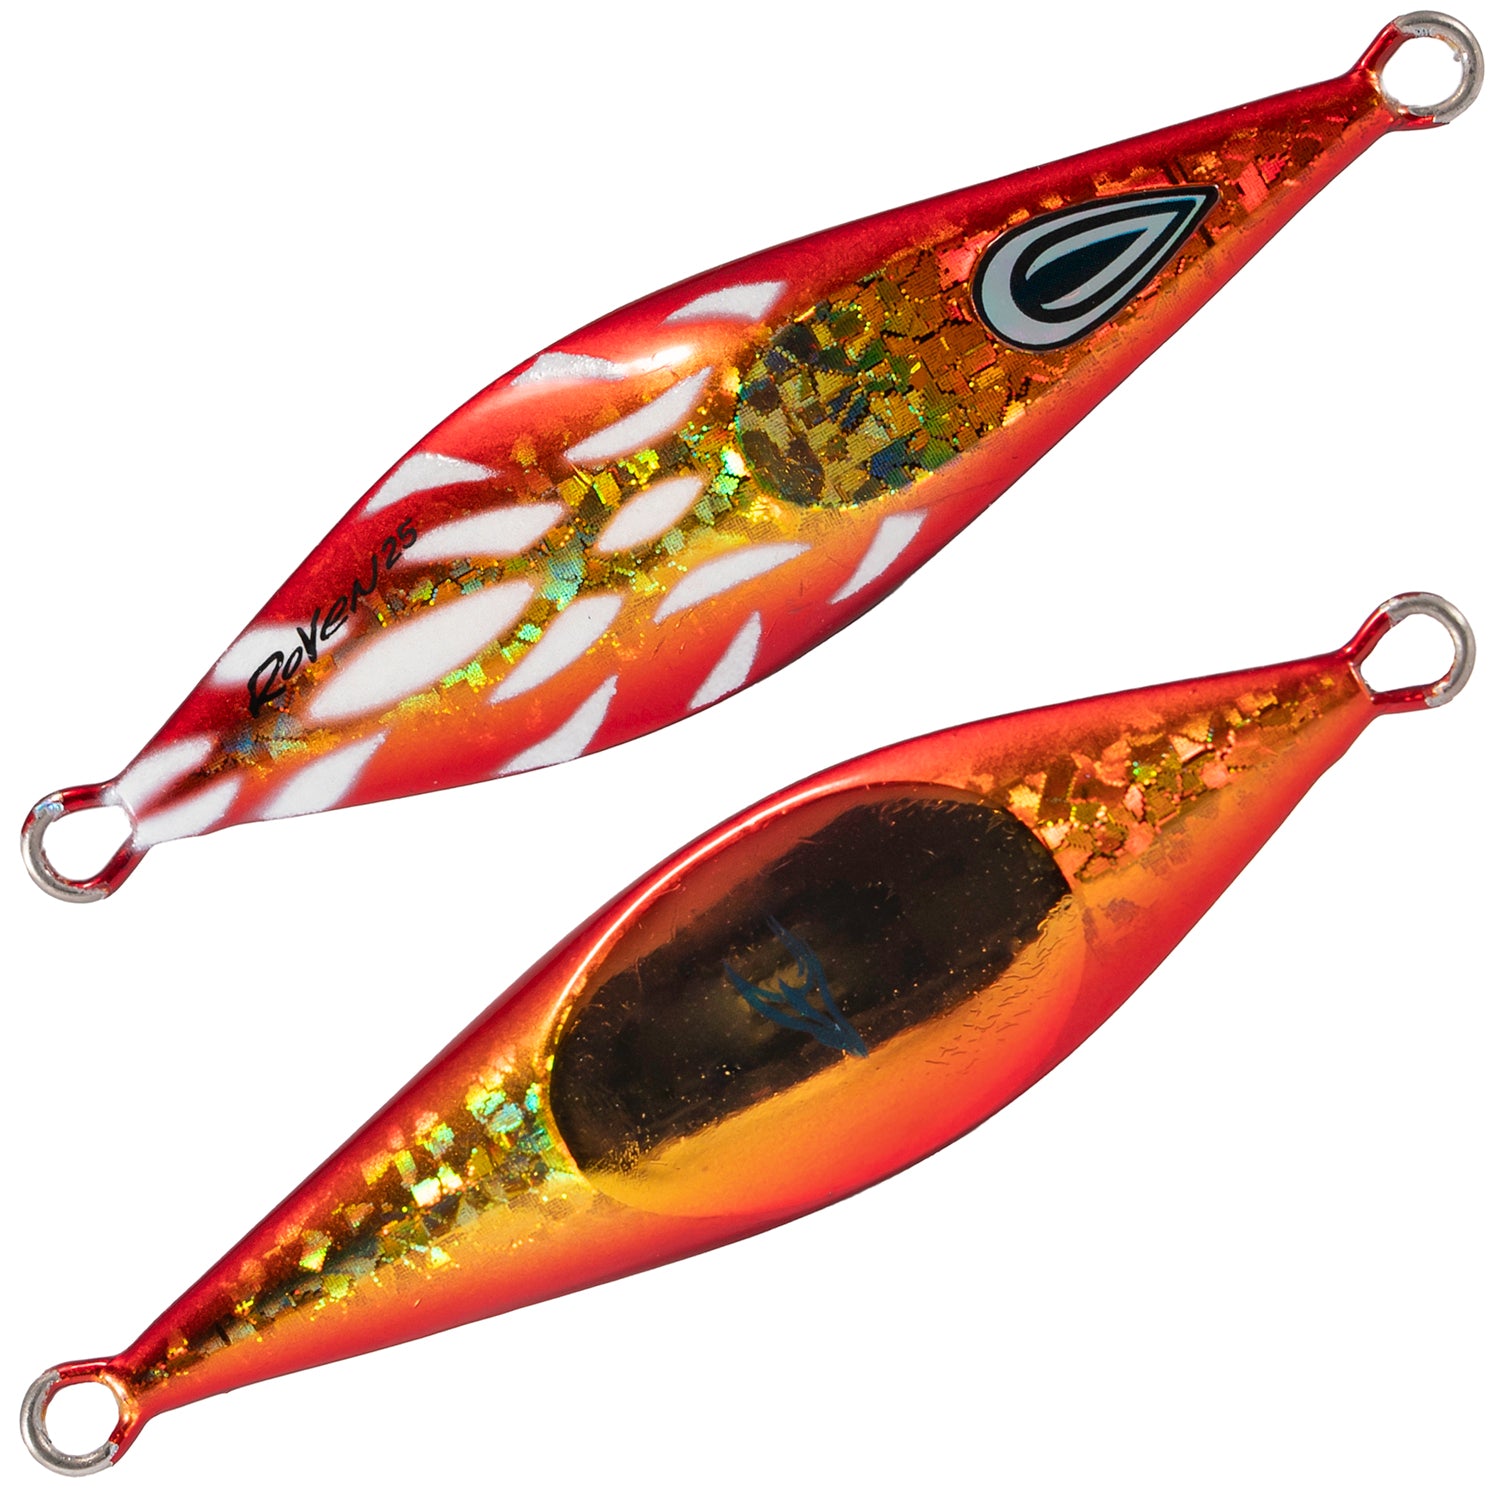 Oceans Legacy Roven Jig Rigged 6g 4